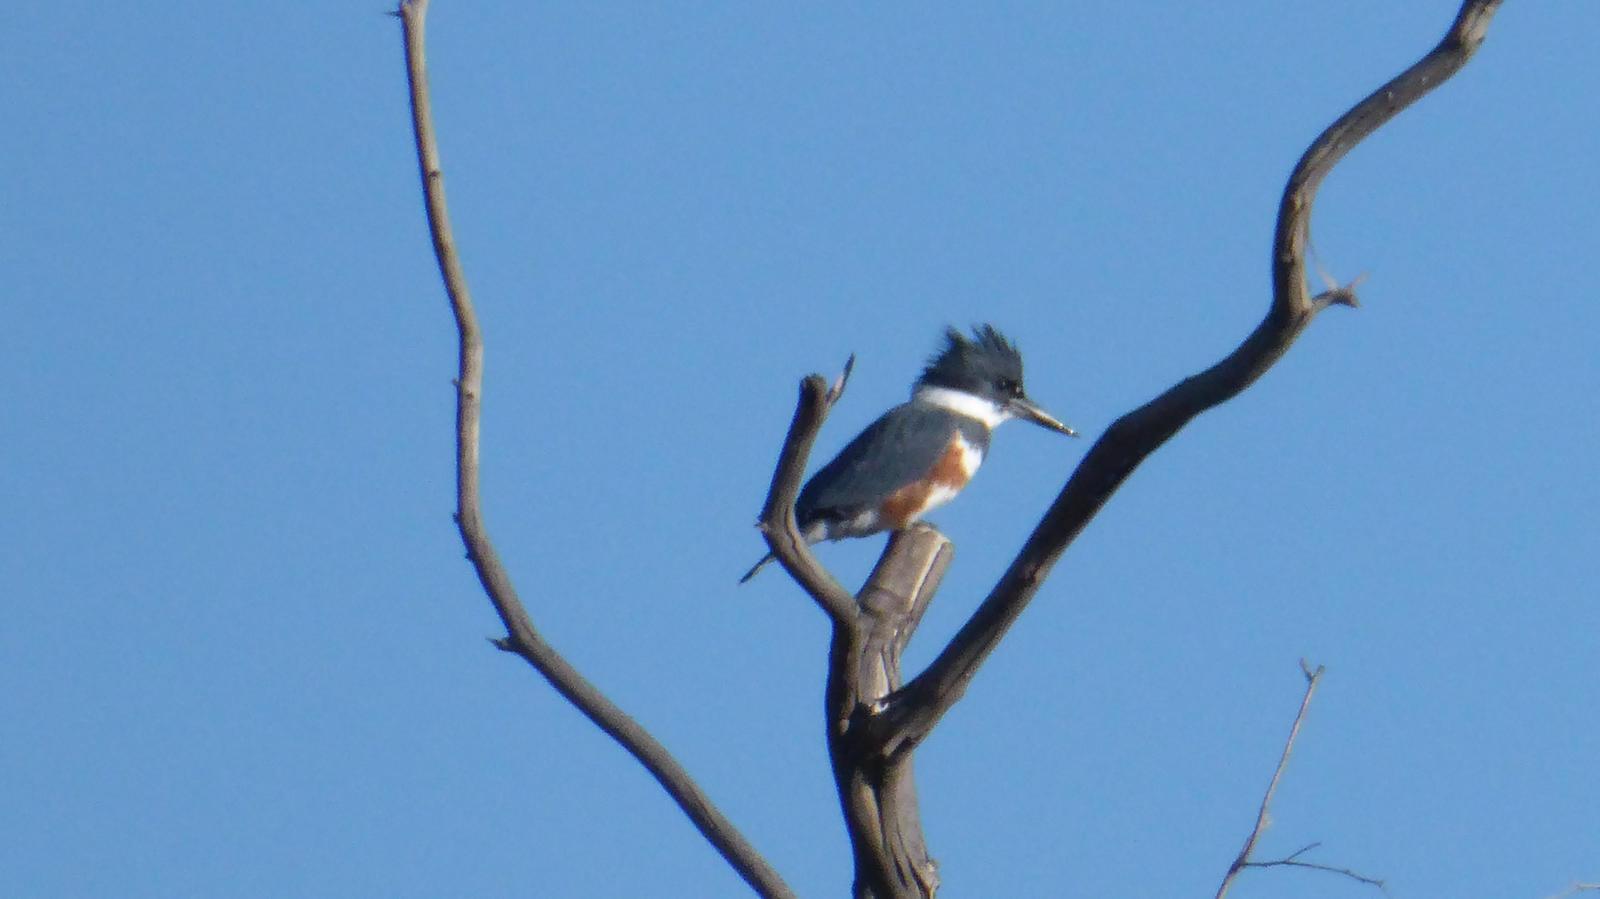 Belted Kingfisher Photo by Daliel Leite